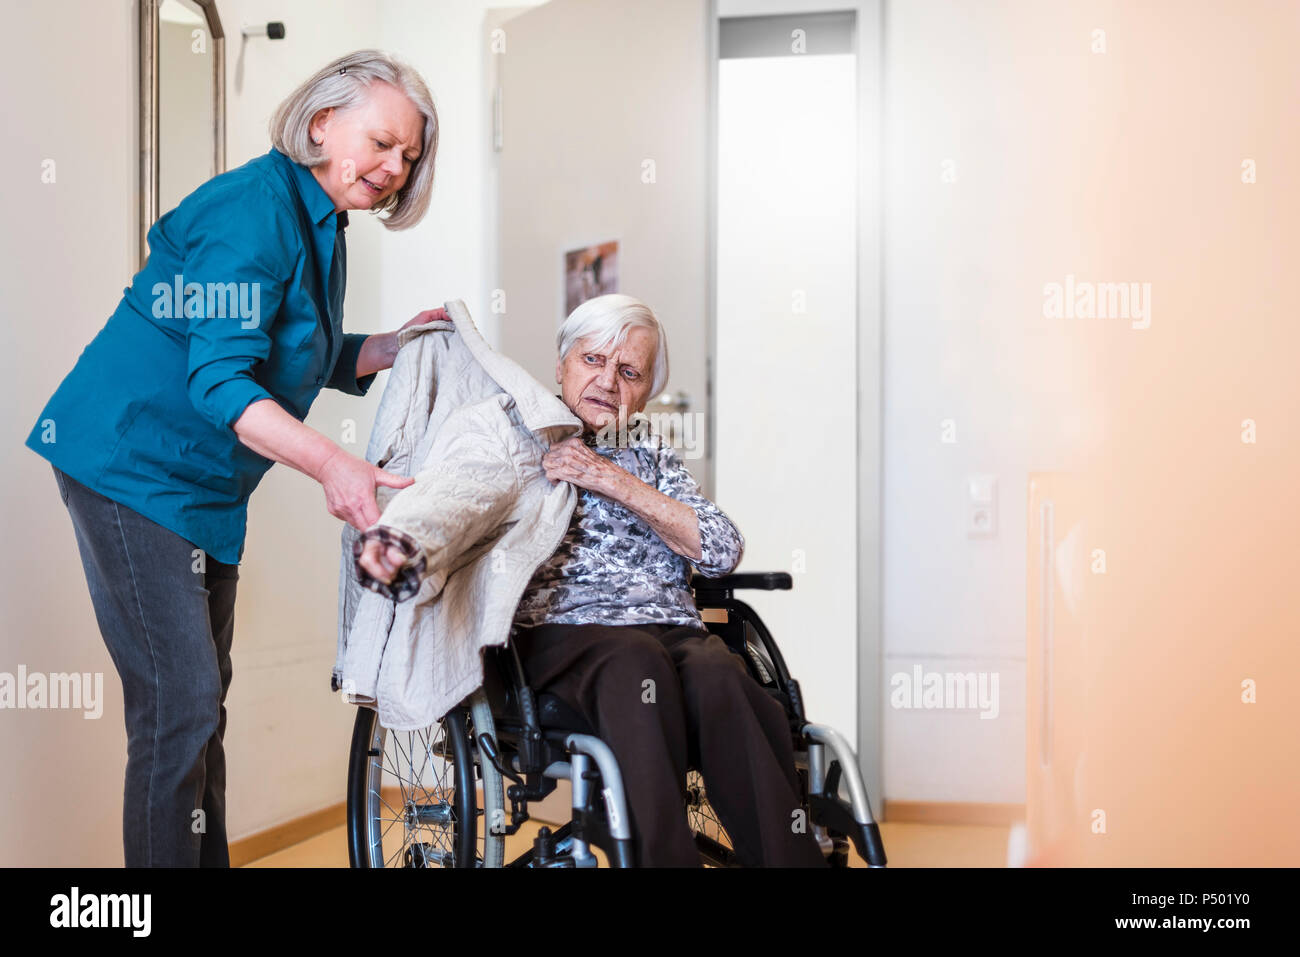 Woman taking care of old woman in wheelchair putting her jacket on Stock Photo